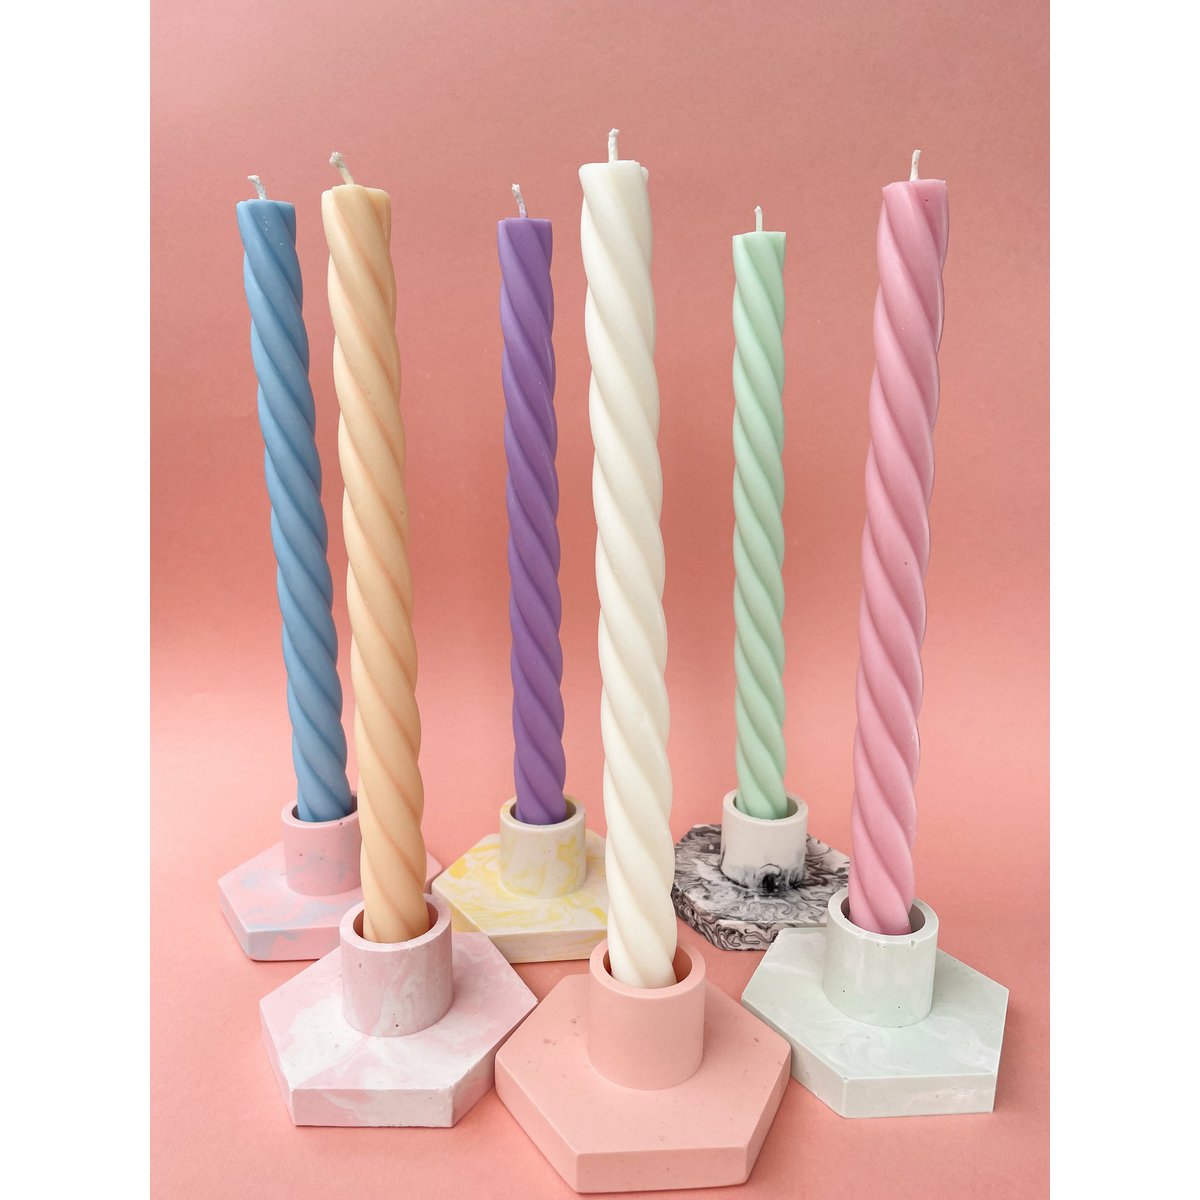 TWISTED CANDLE - PASTEL GREEN